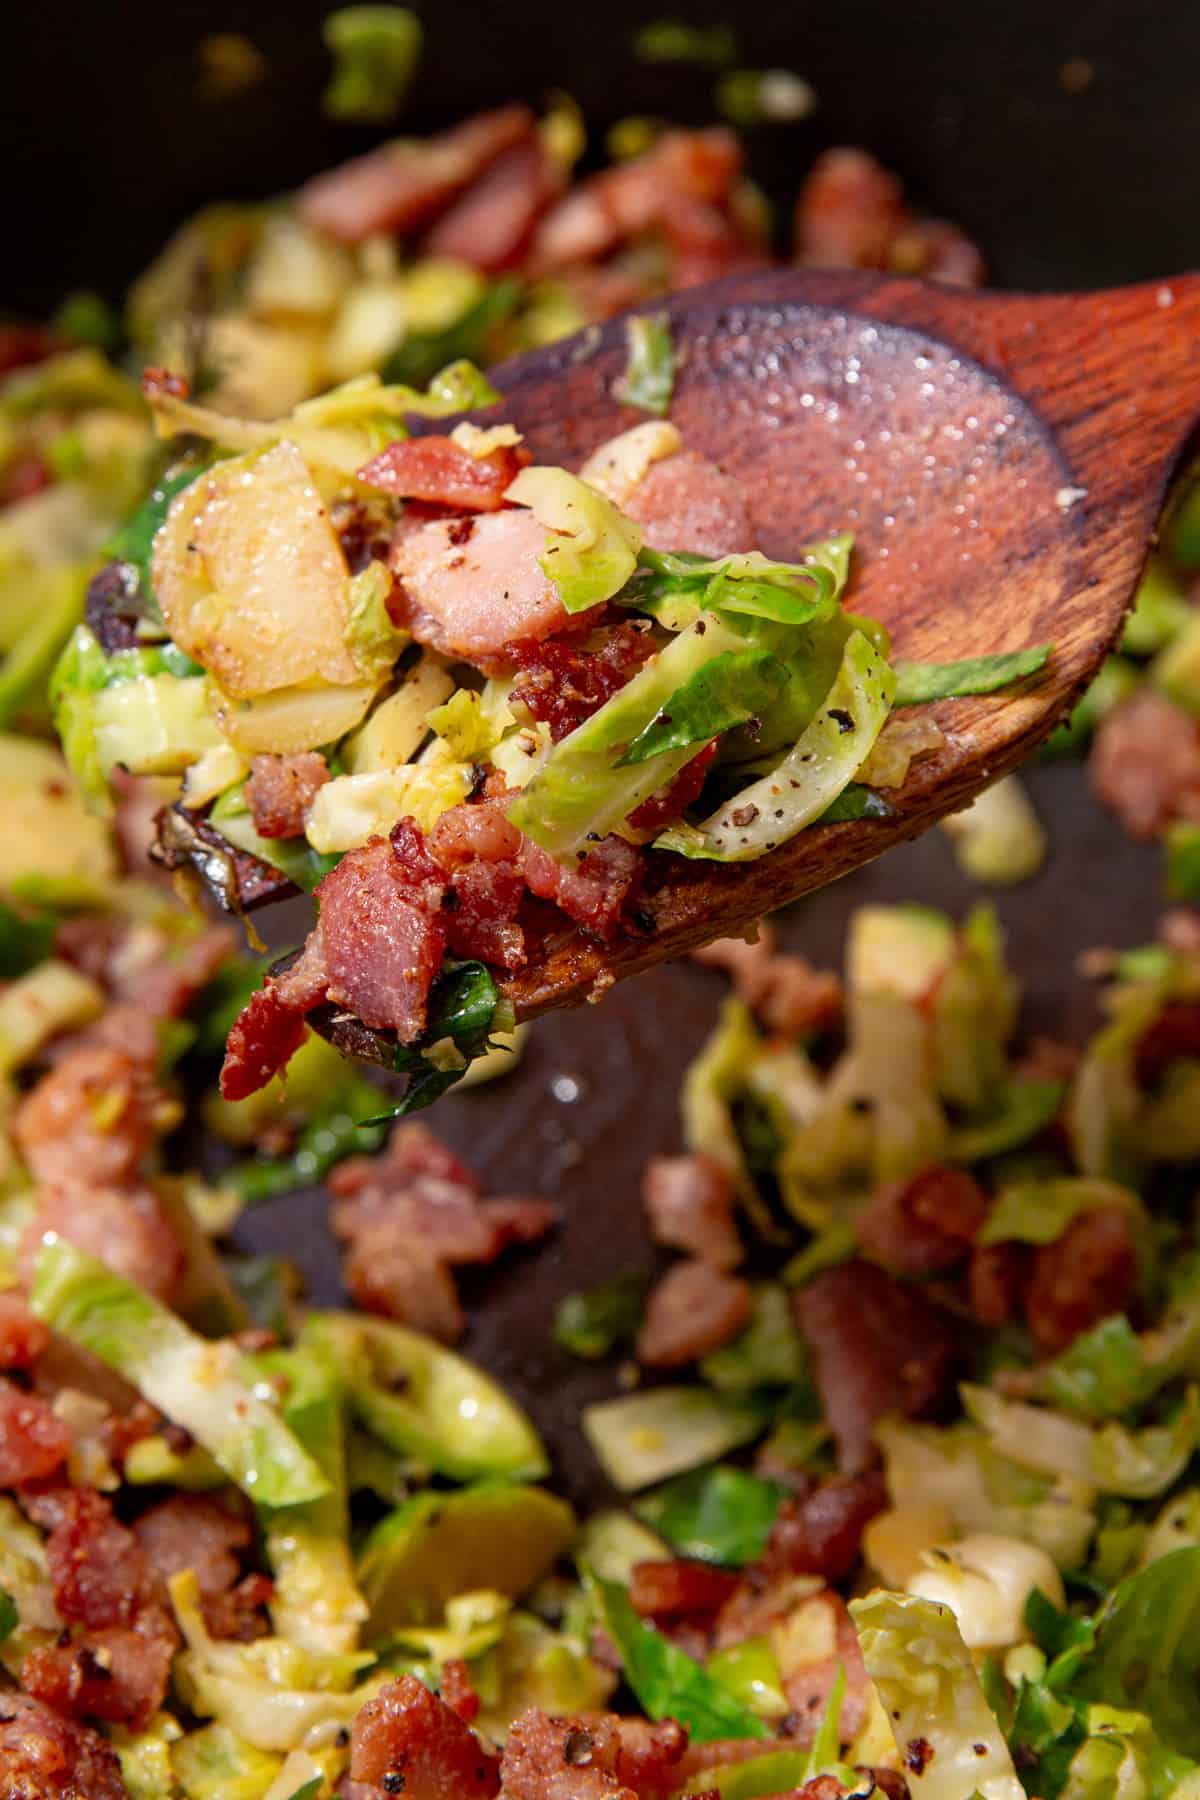 Sliced Brussel sprouts with browned bacon pieces being stirred with a wooden spoon.